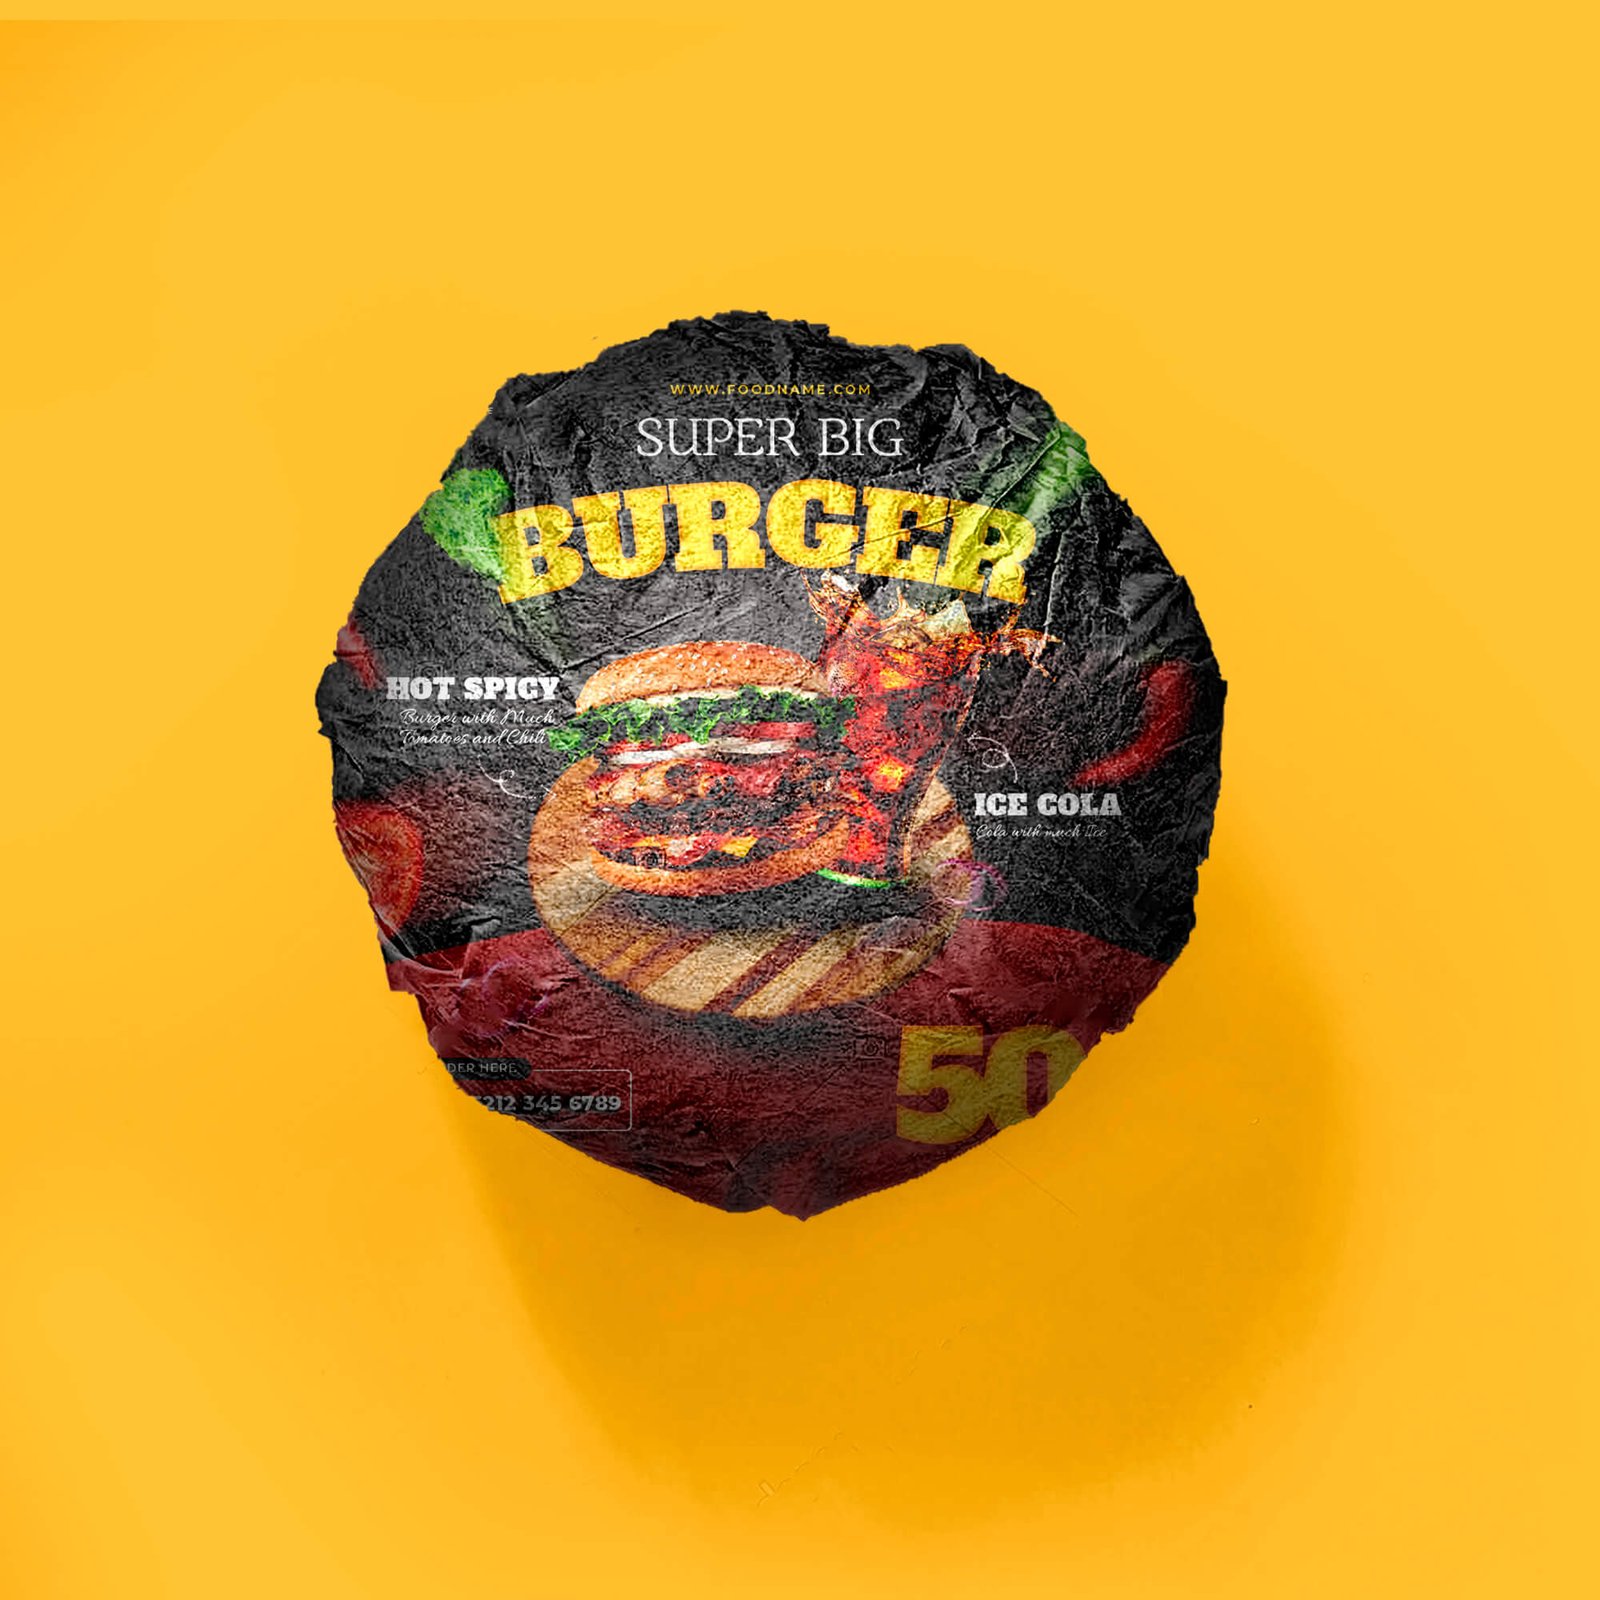 Design Free Burger Wrapping Paper Mockup PSD Template